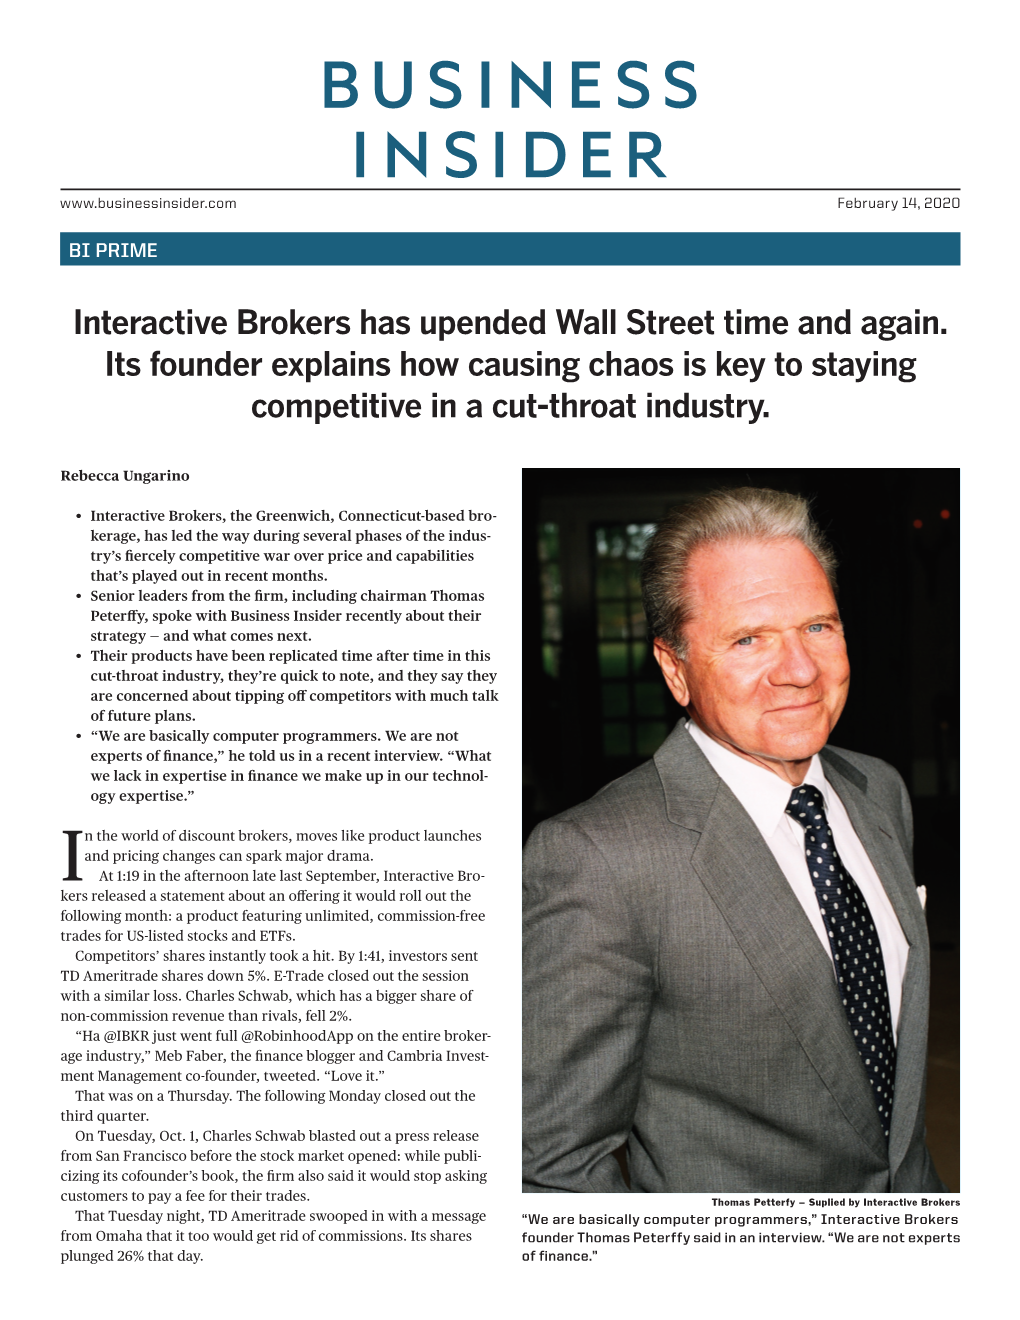 Interactive Brokers Has Upended Wall Street Time and Again. Its Founder Explains How Causing Chaos Is Key to Staying Competitive in a Cut-Throat Industry